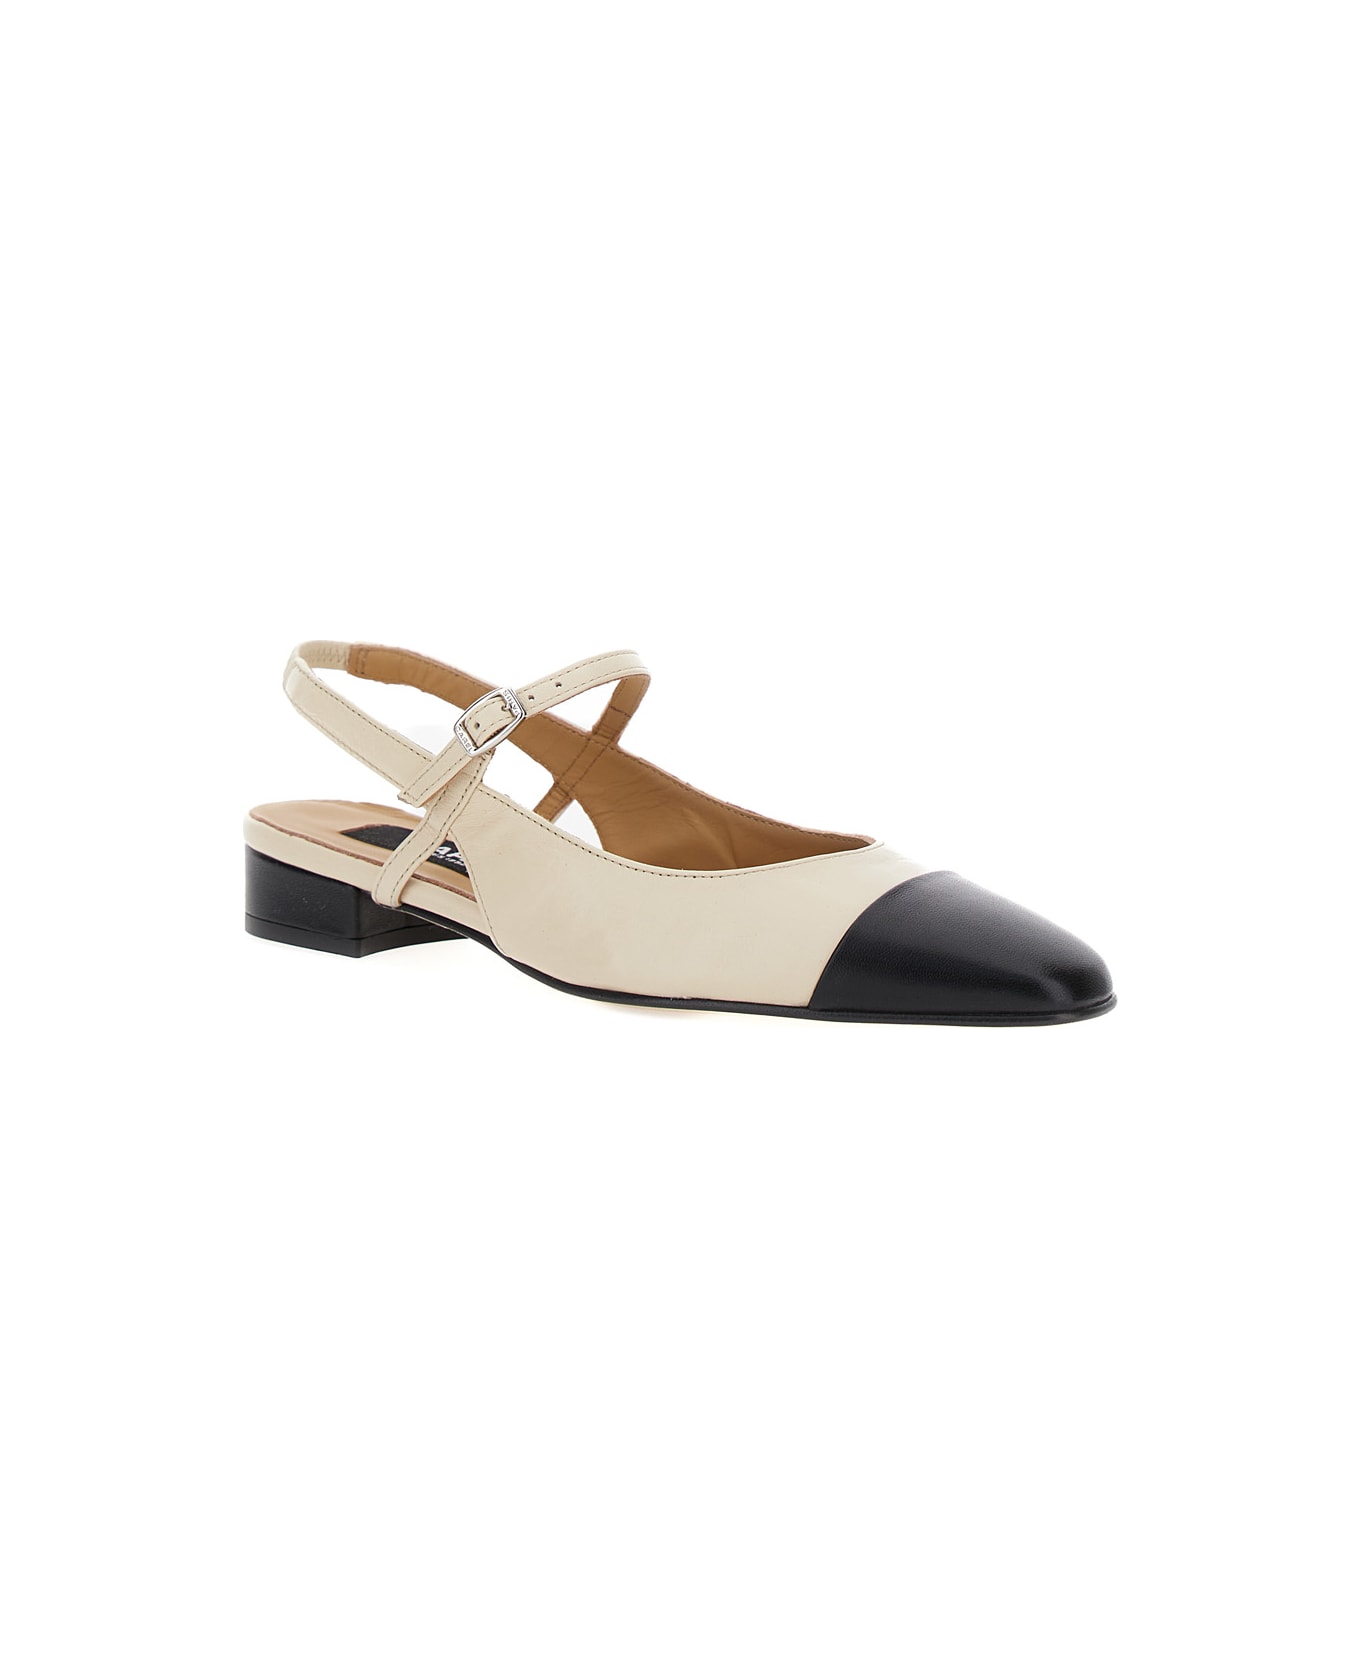 Carel White Slingback Pumps With Contrasting Toe In Leather Woman - Beige